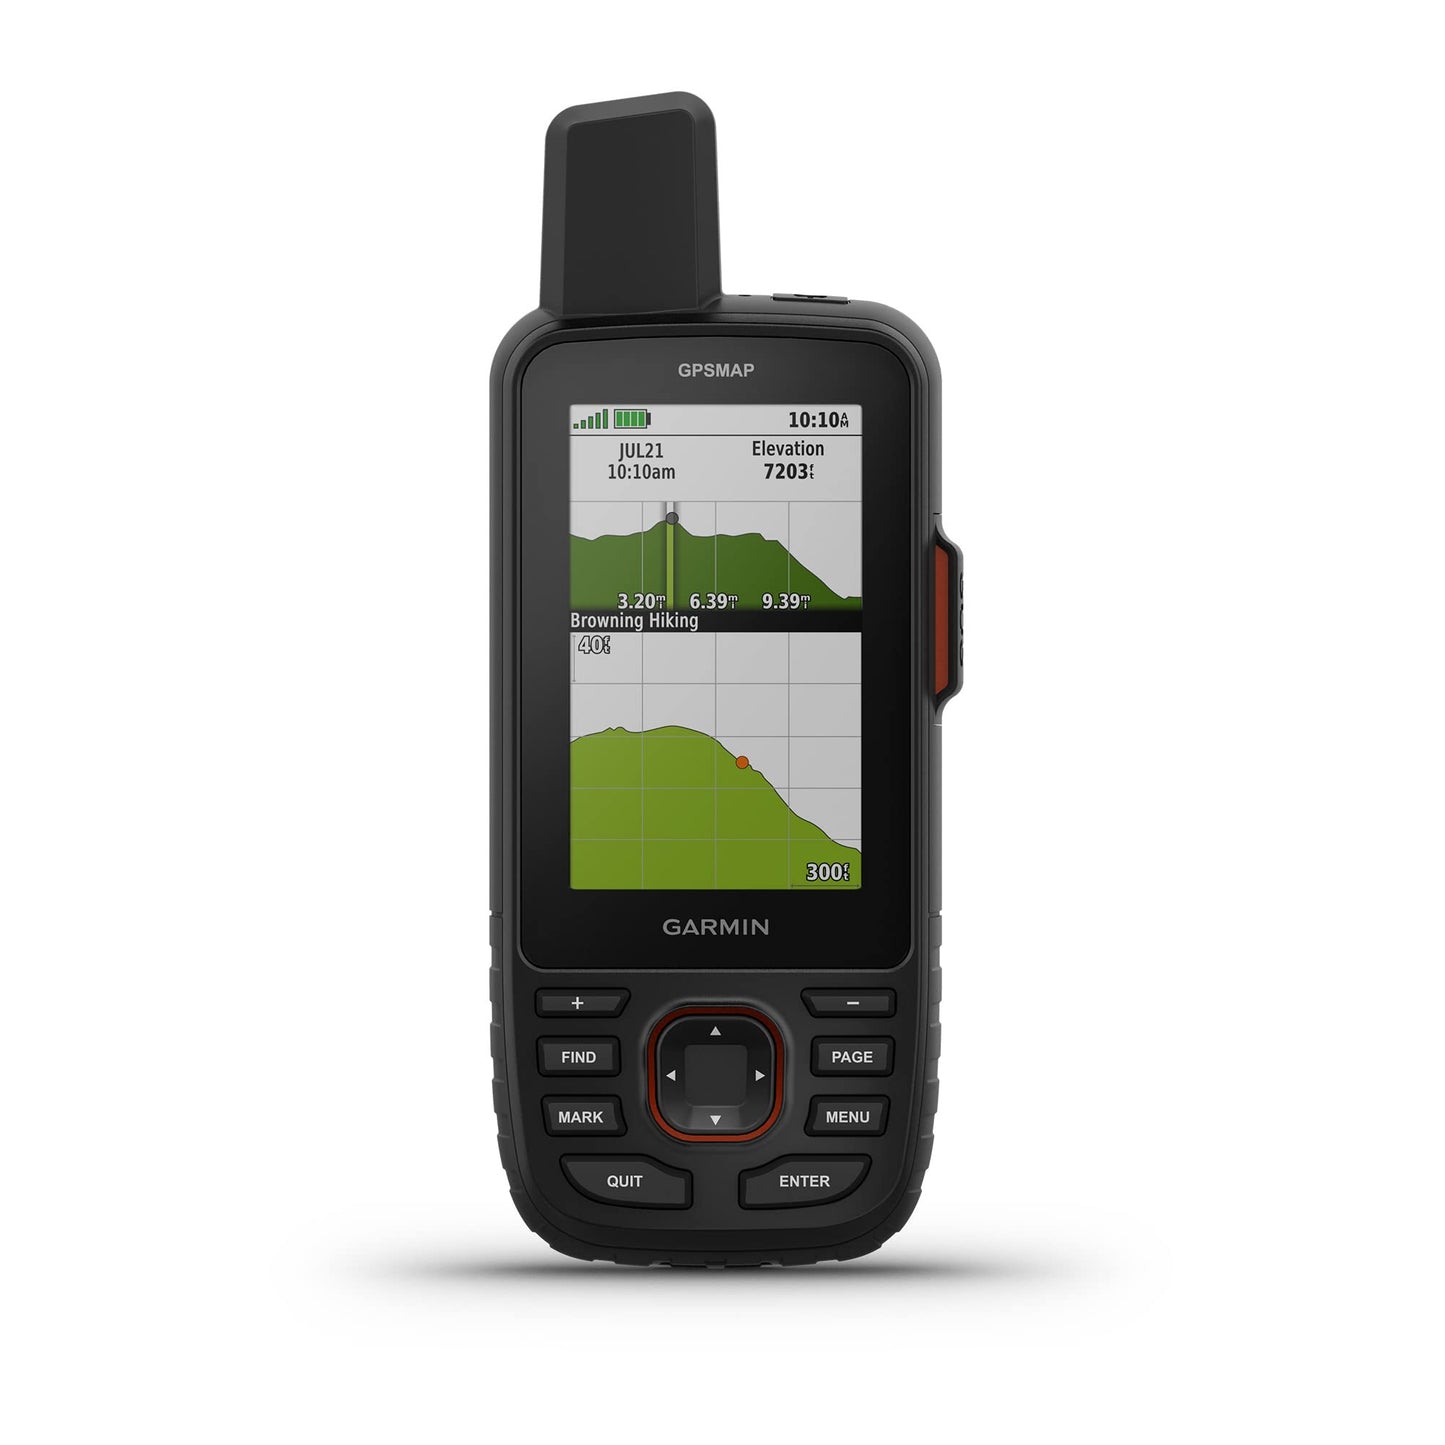 Garmin GPSMAP 67 Rugged GPS Handheld, Multi-Band GNSS, Topo Mapping, Satellite Imagery, Color Display